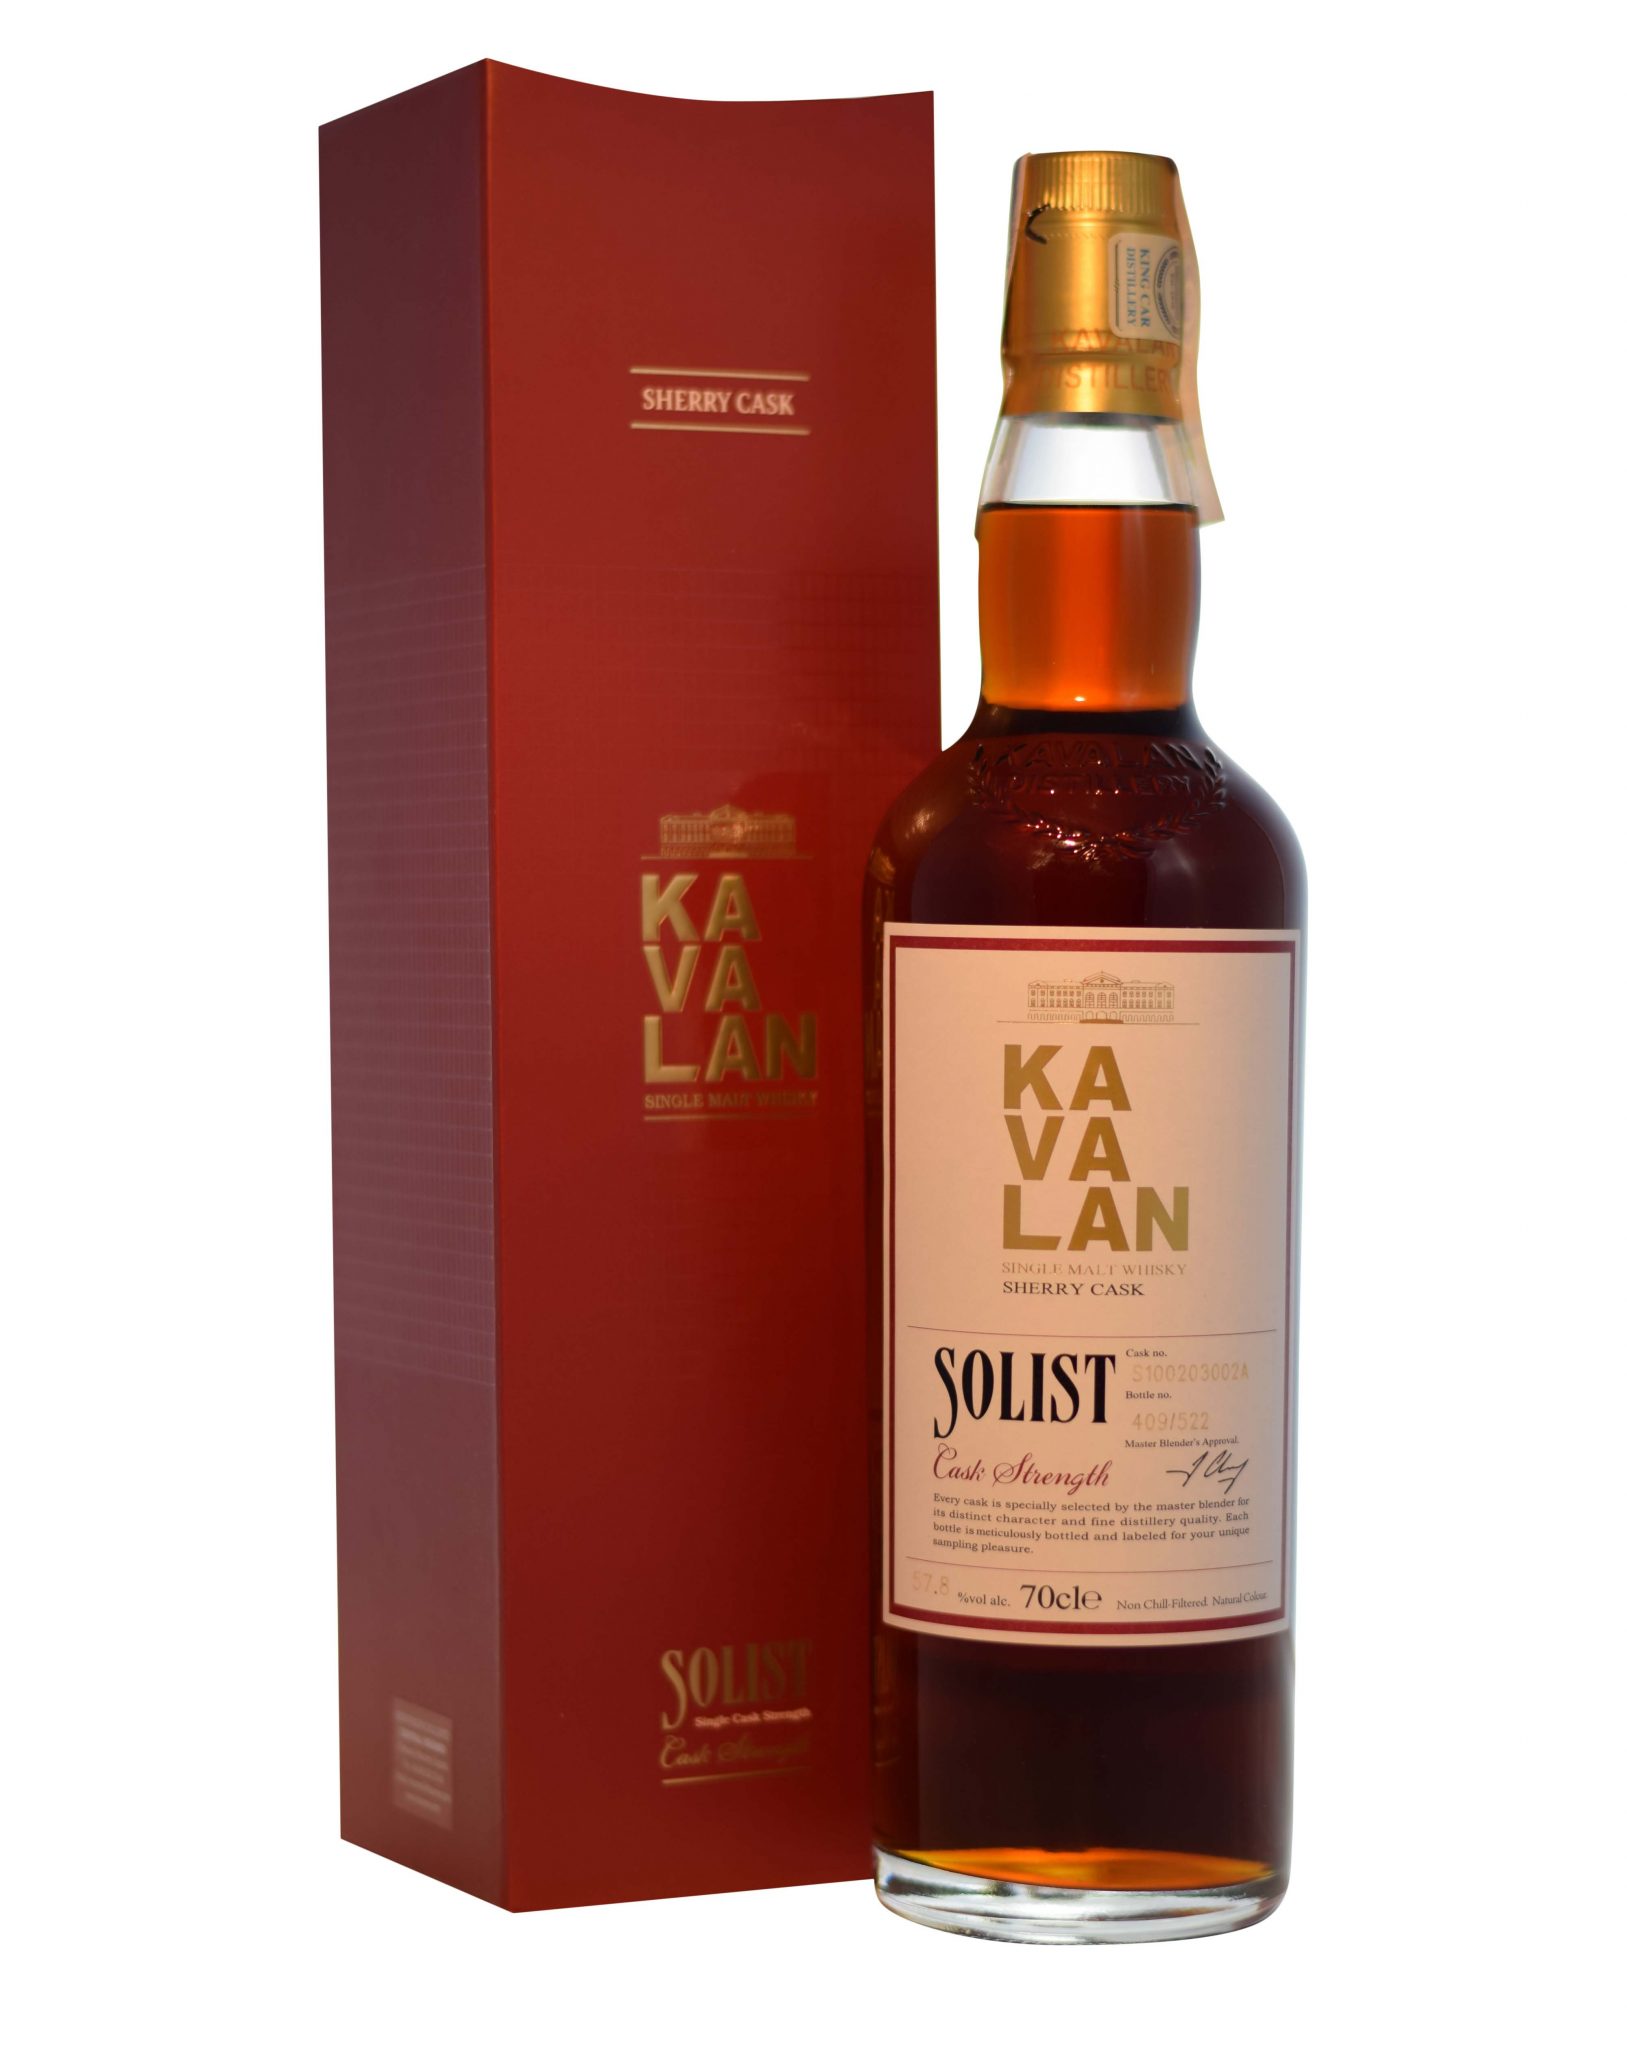 Kavalan Solist Cask Strength Sherry Cask Musthave Malts MHM